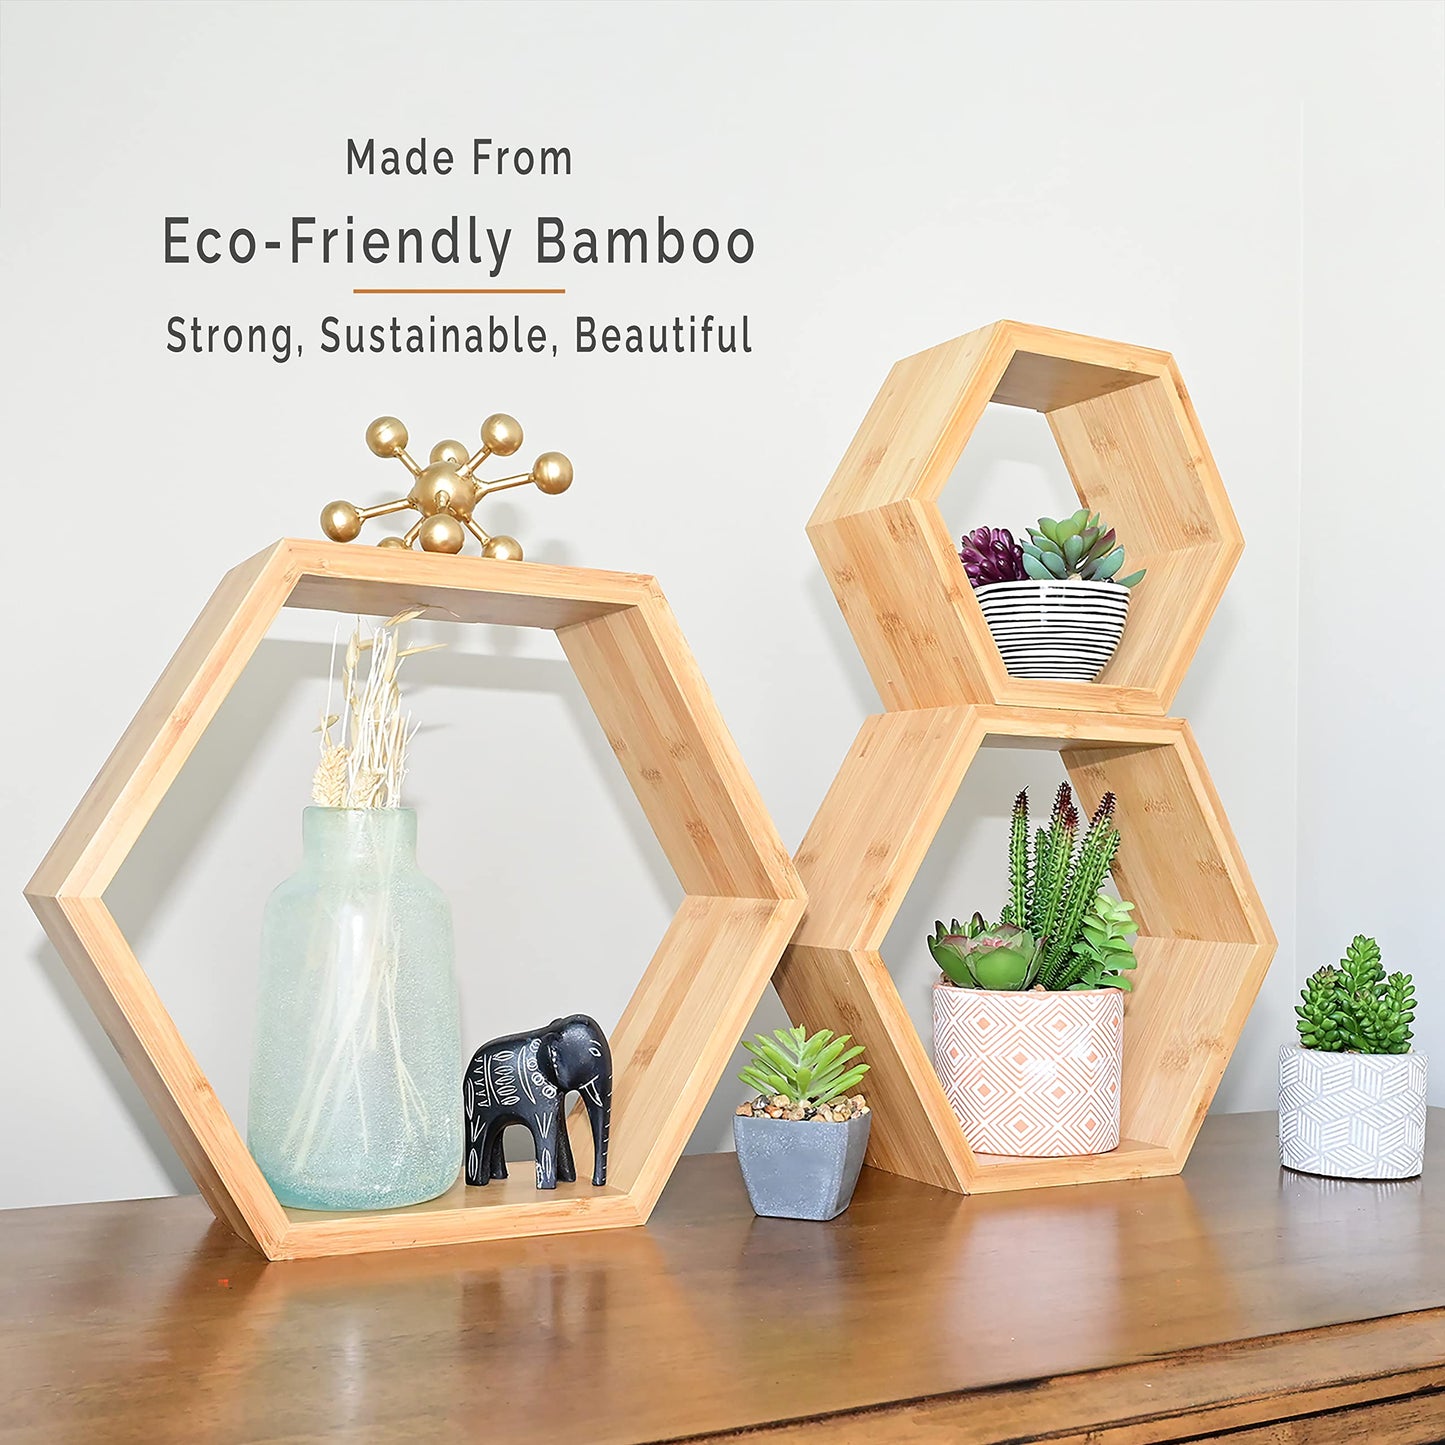 Bamboo Hexagon Floating Shelves For Wall Decor Set Of 3 | Sustainable Home Decor